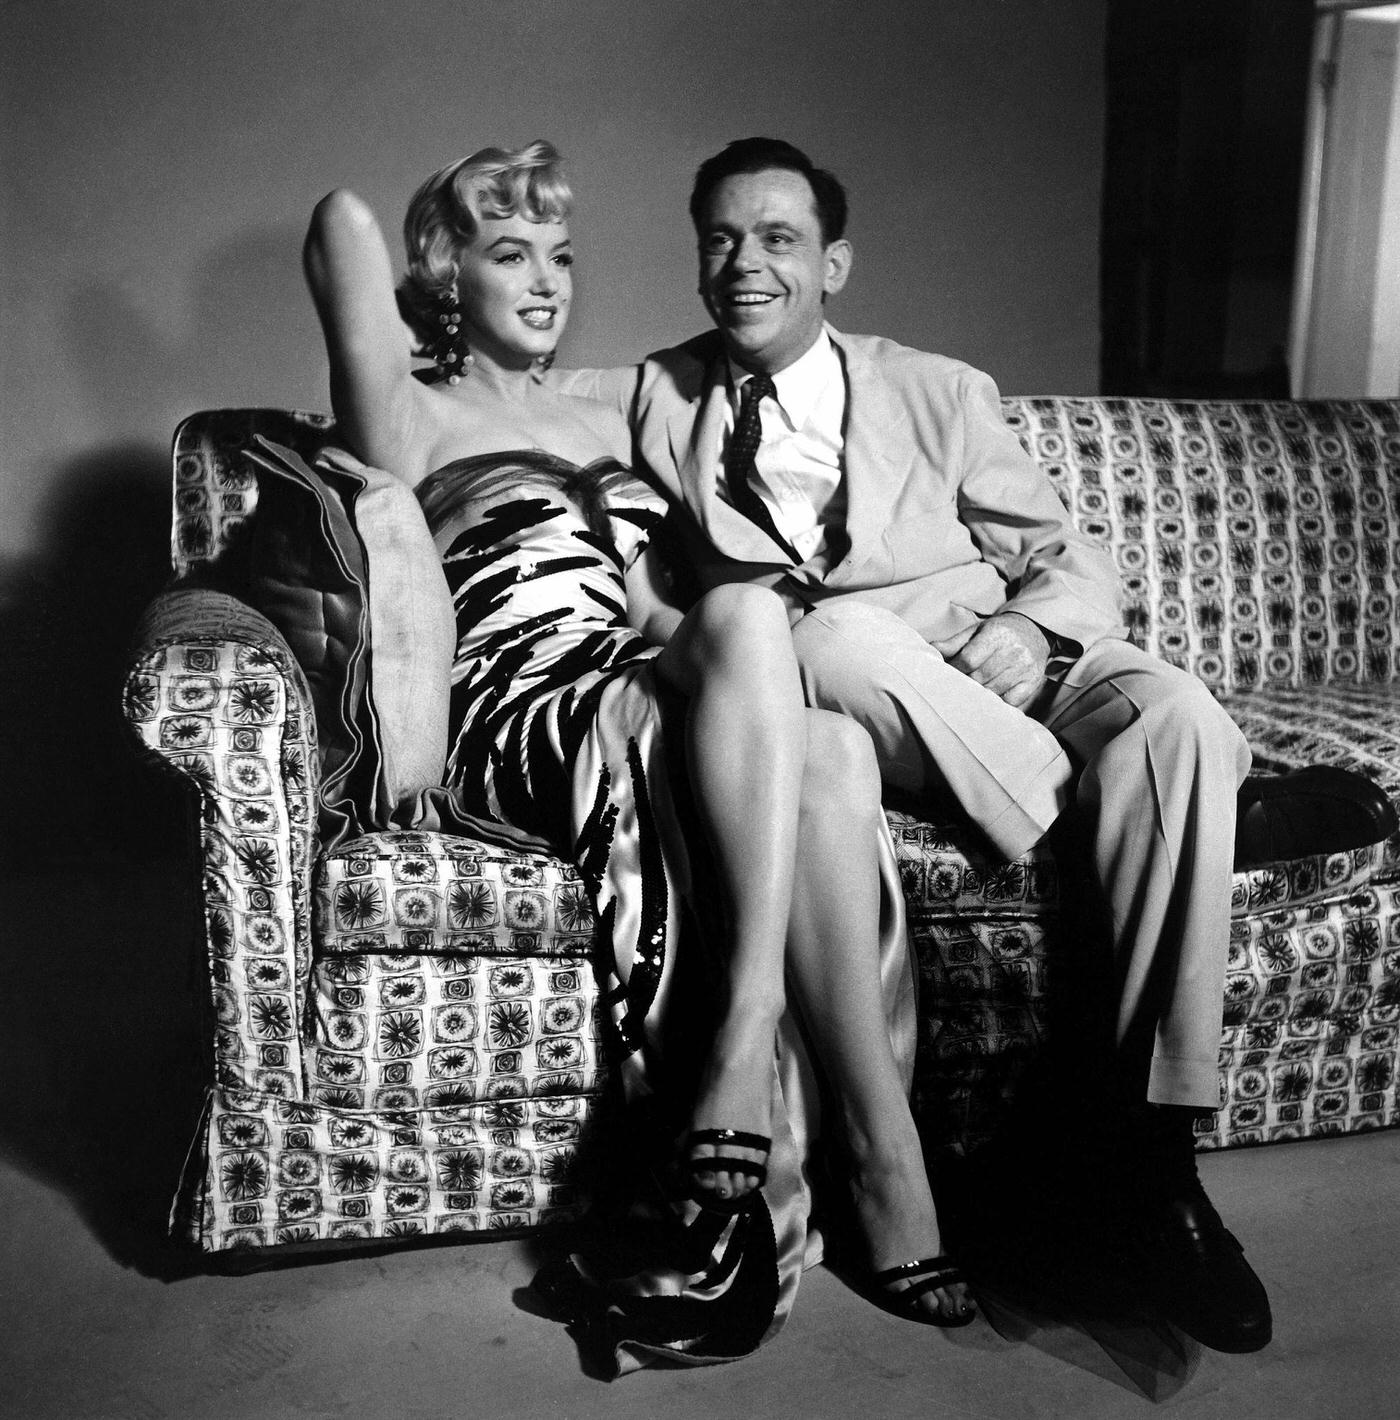 Marilyn Monroe wearing a tiger-striped dress sits next to co-star Tom Ewell in 1954 during the filming of "The Seven Year Itch"